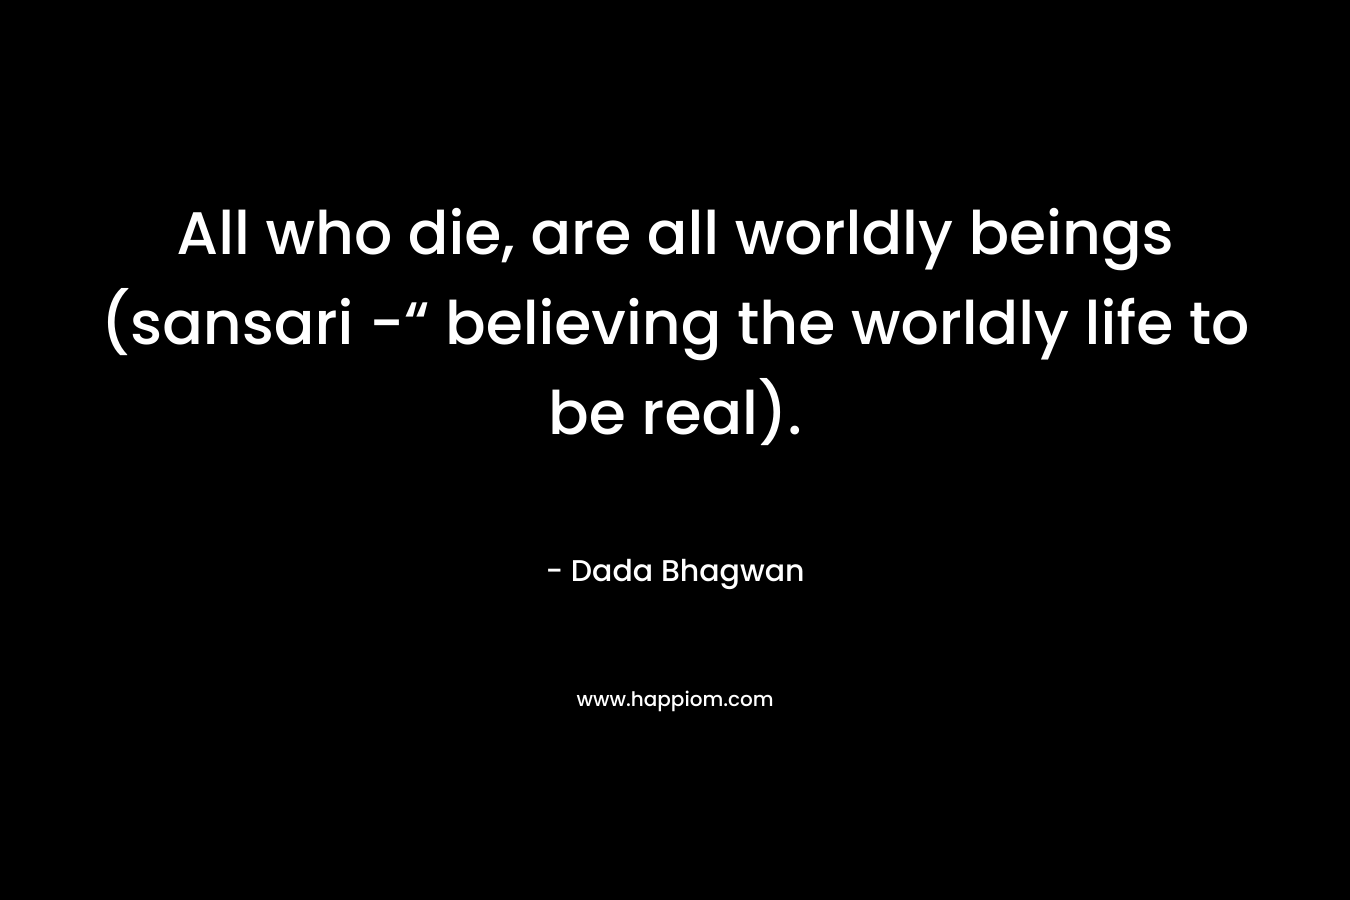 All who die, are all worldly beings (sansari -“ believing the worldly life to be real).